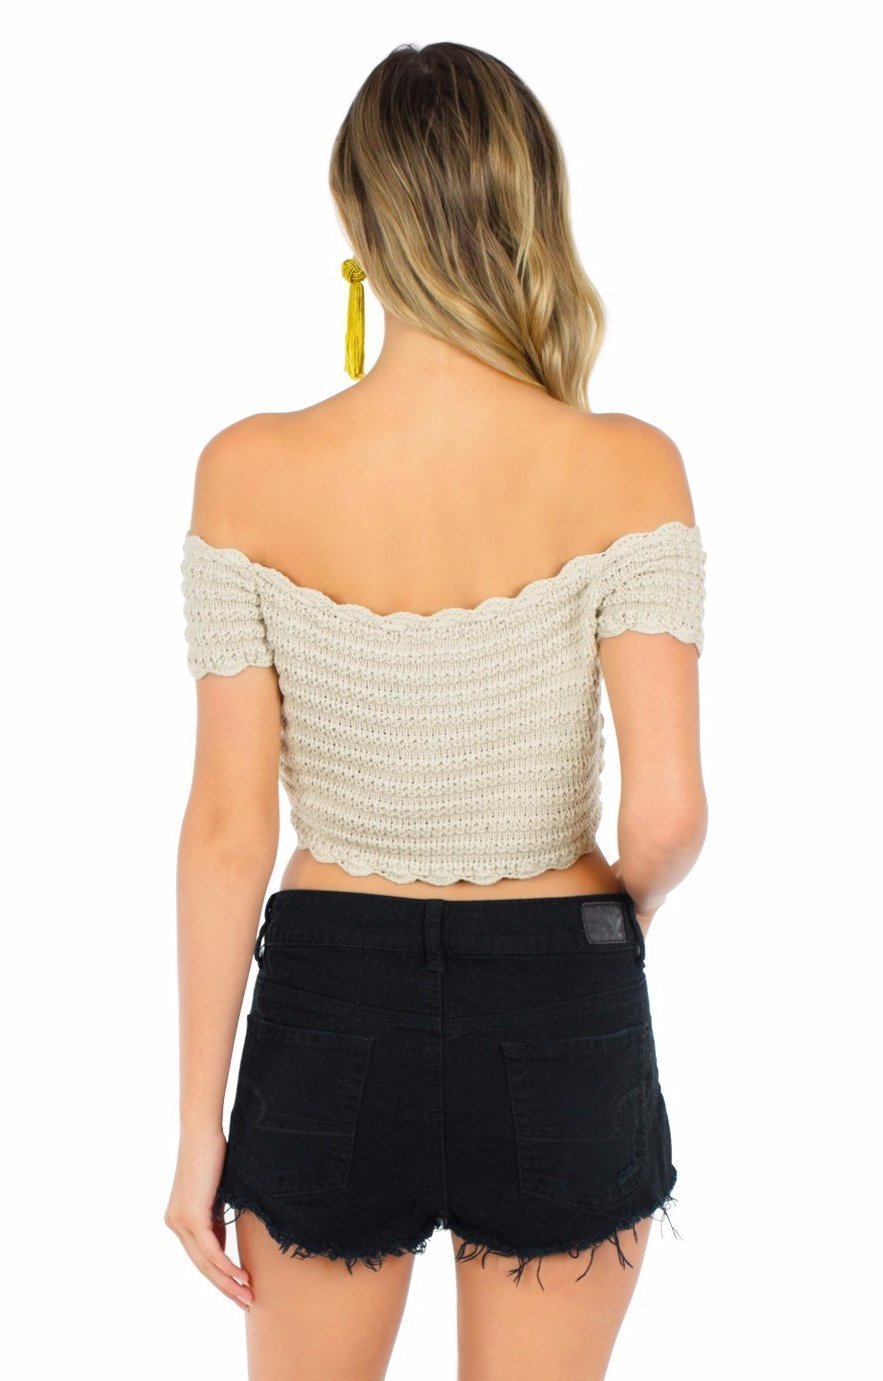 Women outfit in a top rental from WYLDR called Break The Rules Crochet Crop Top